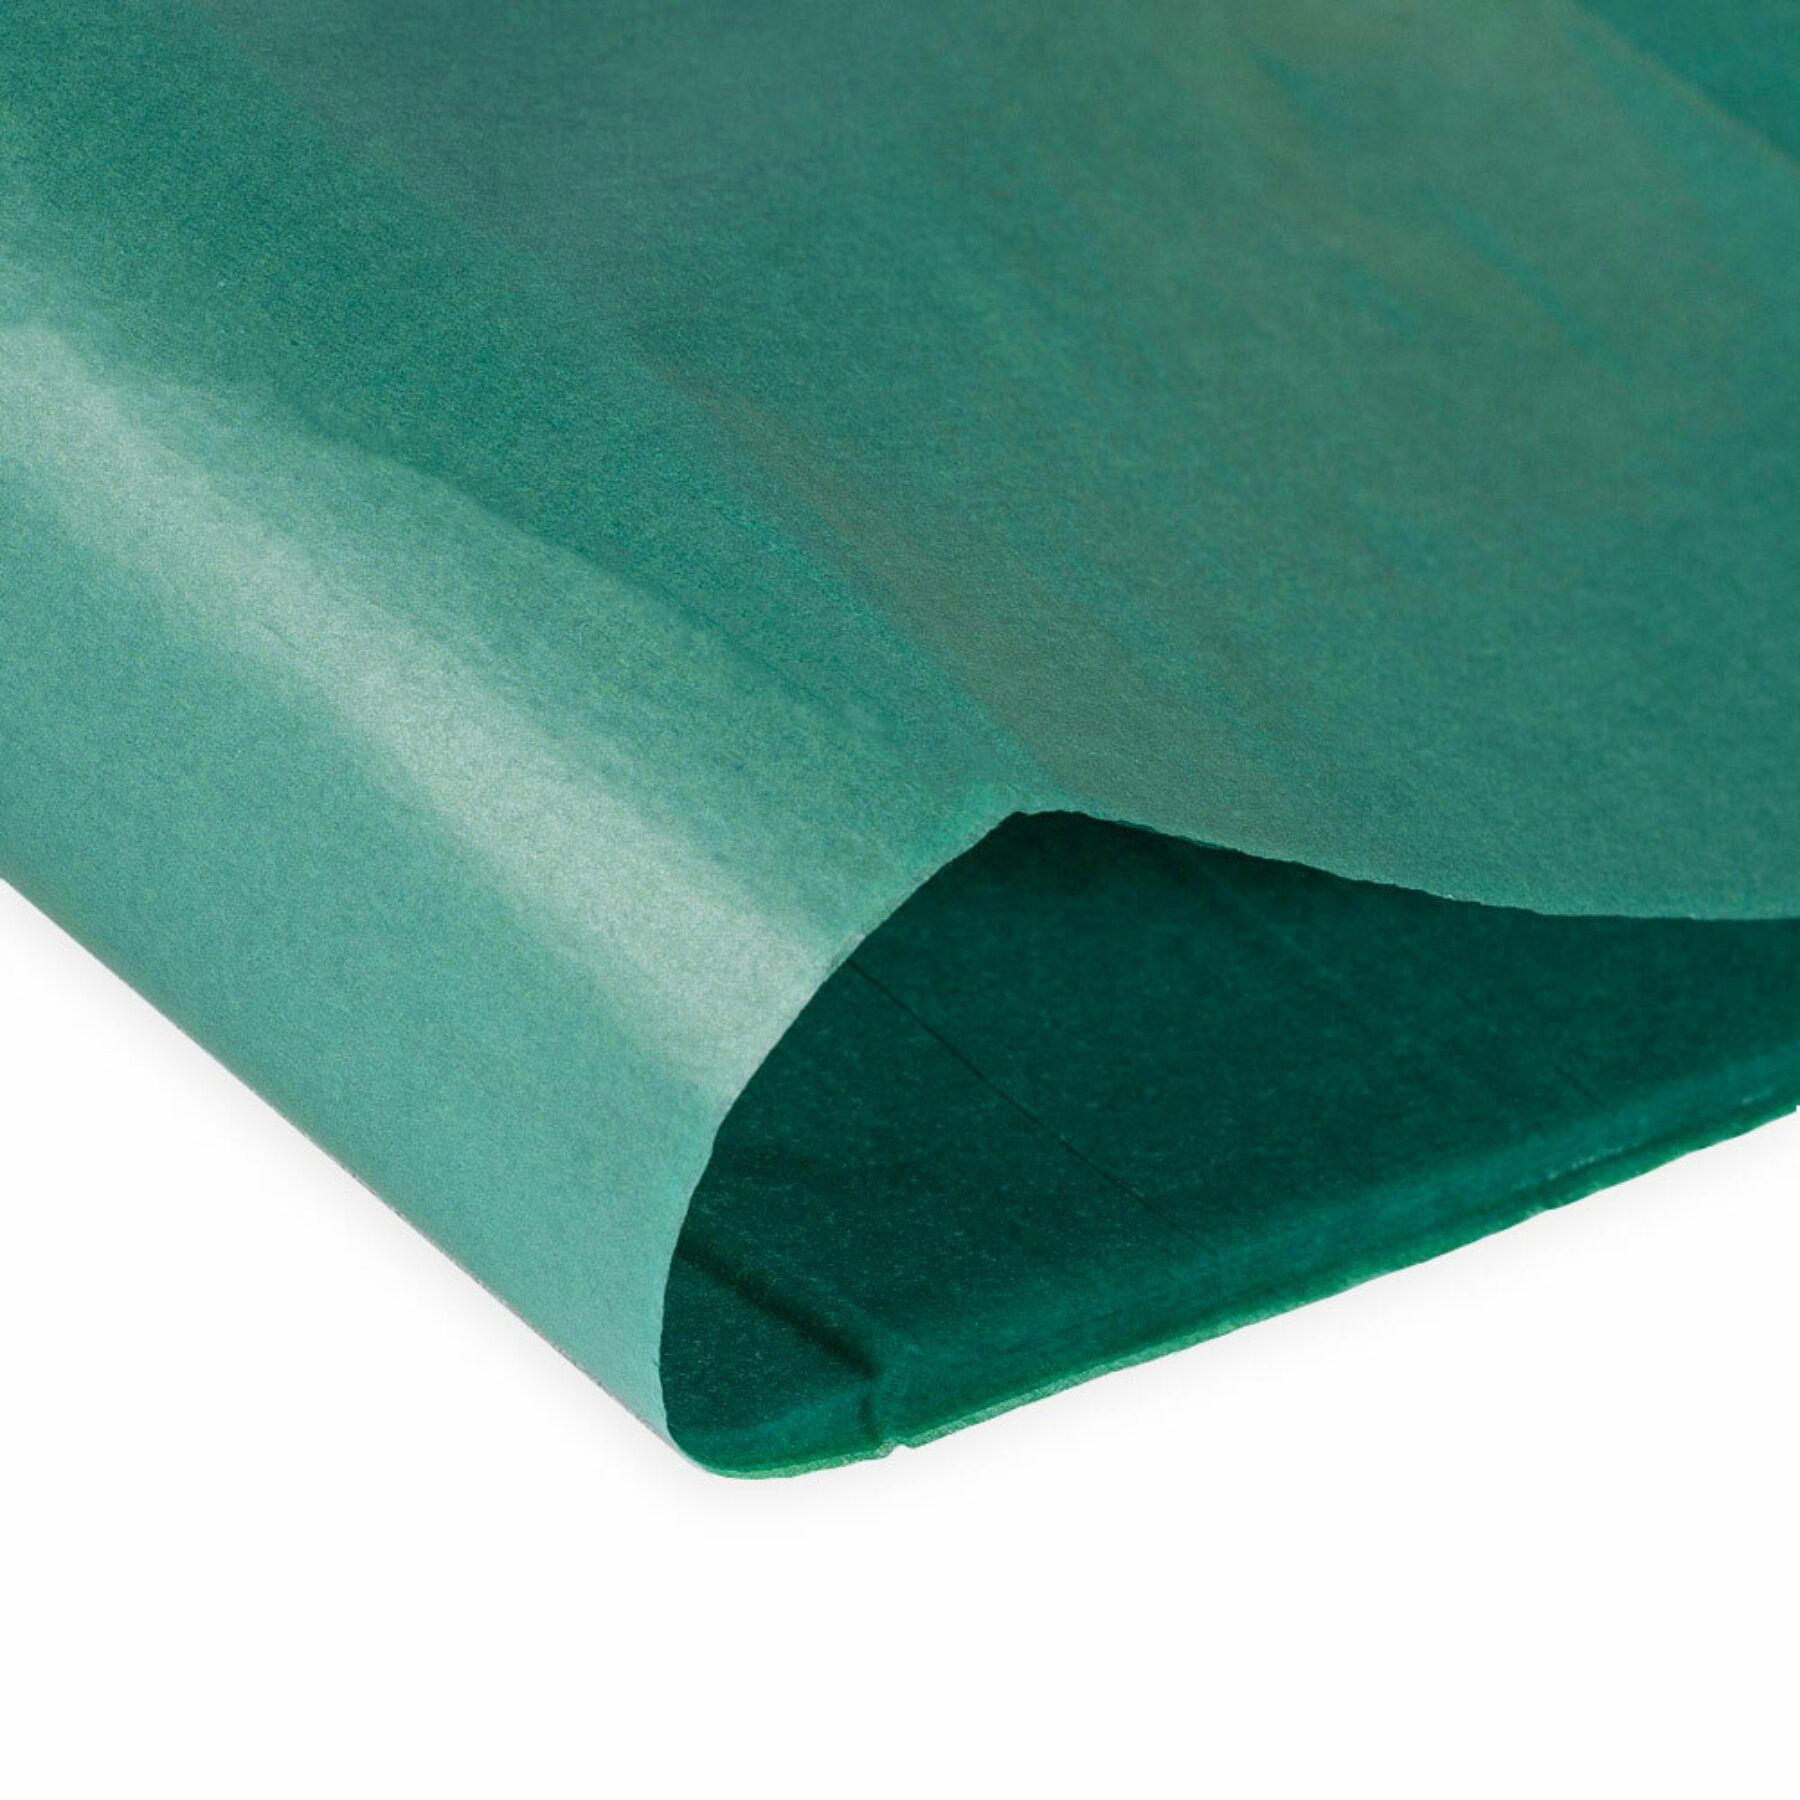 PA066 Green Tissue Paper (480 sheets)